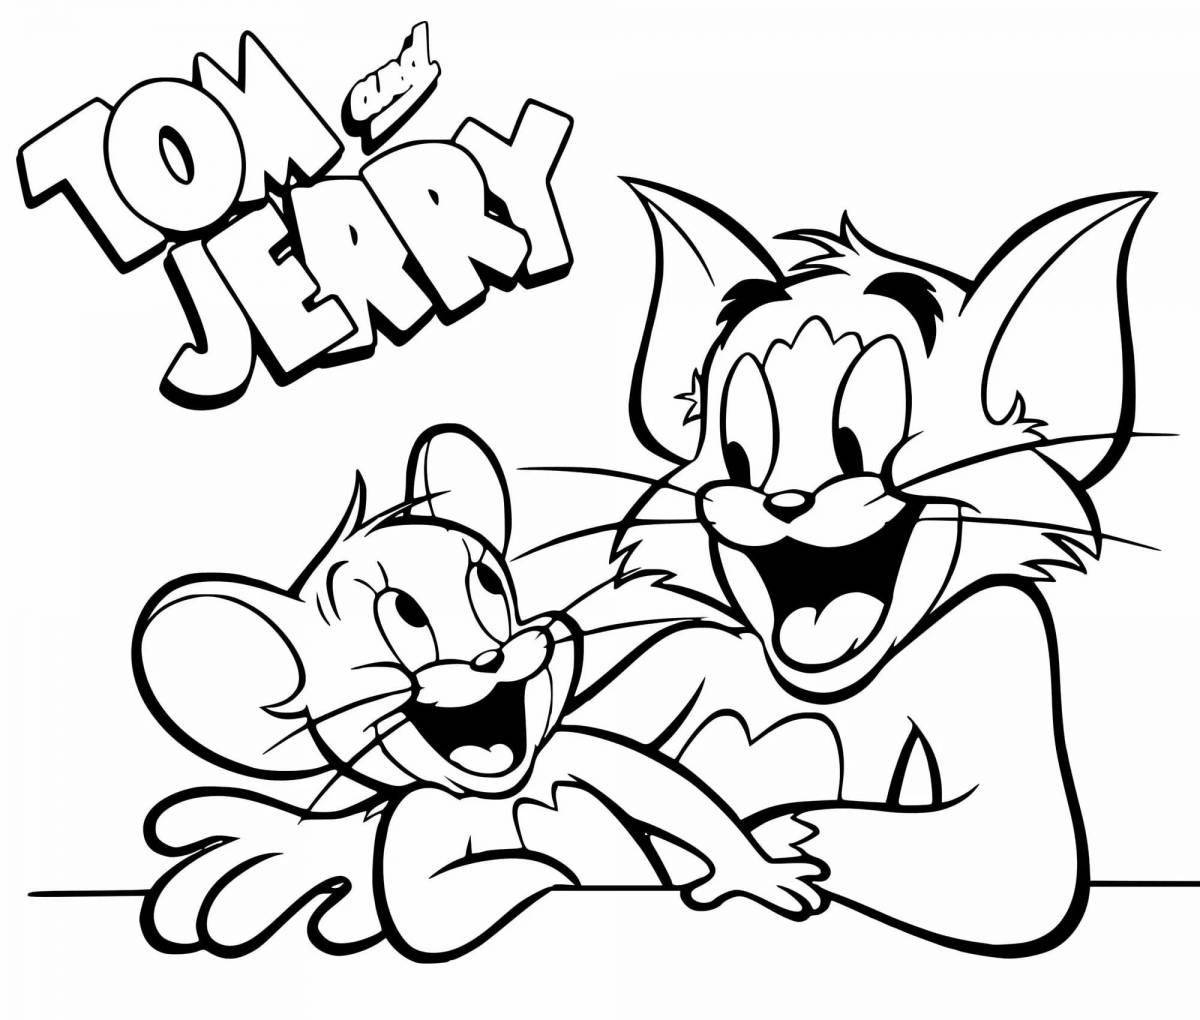 Tom and jerry in good quality #11